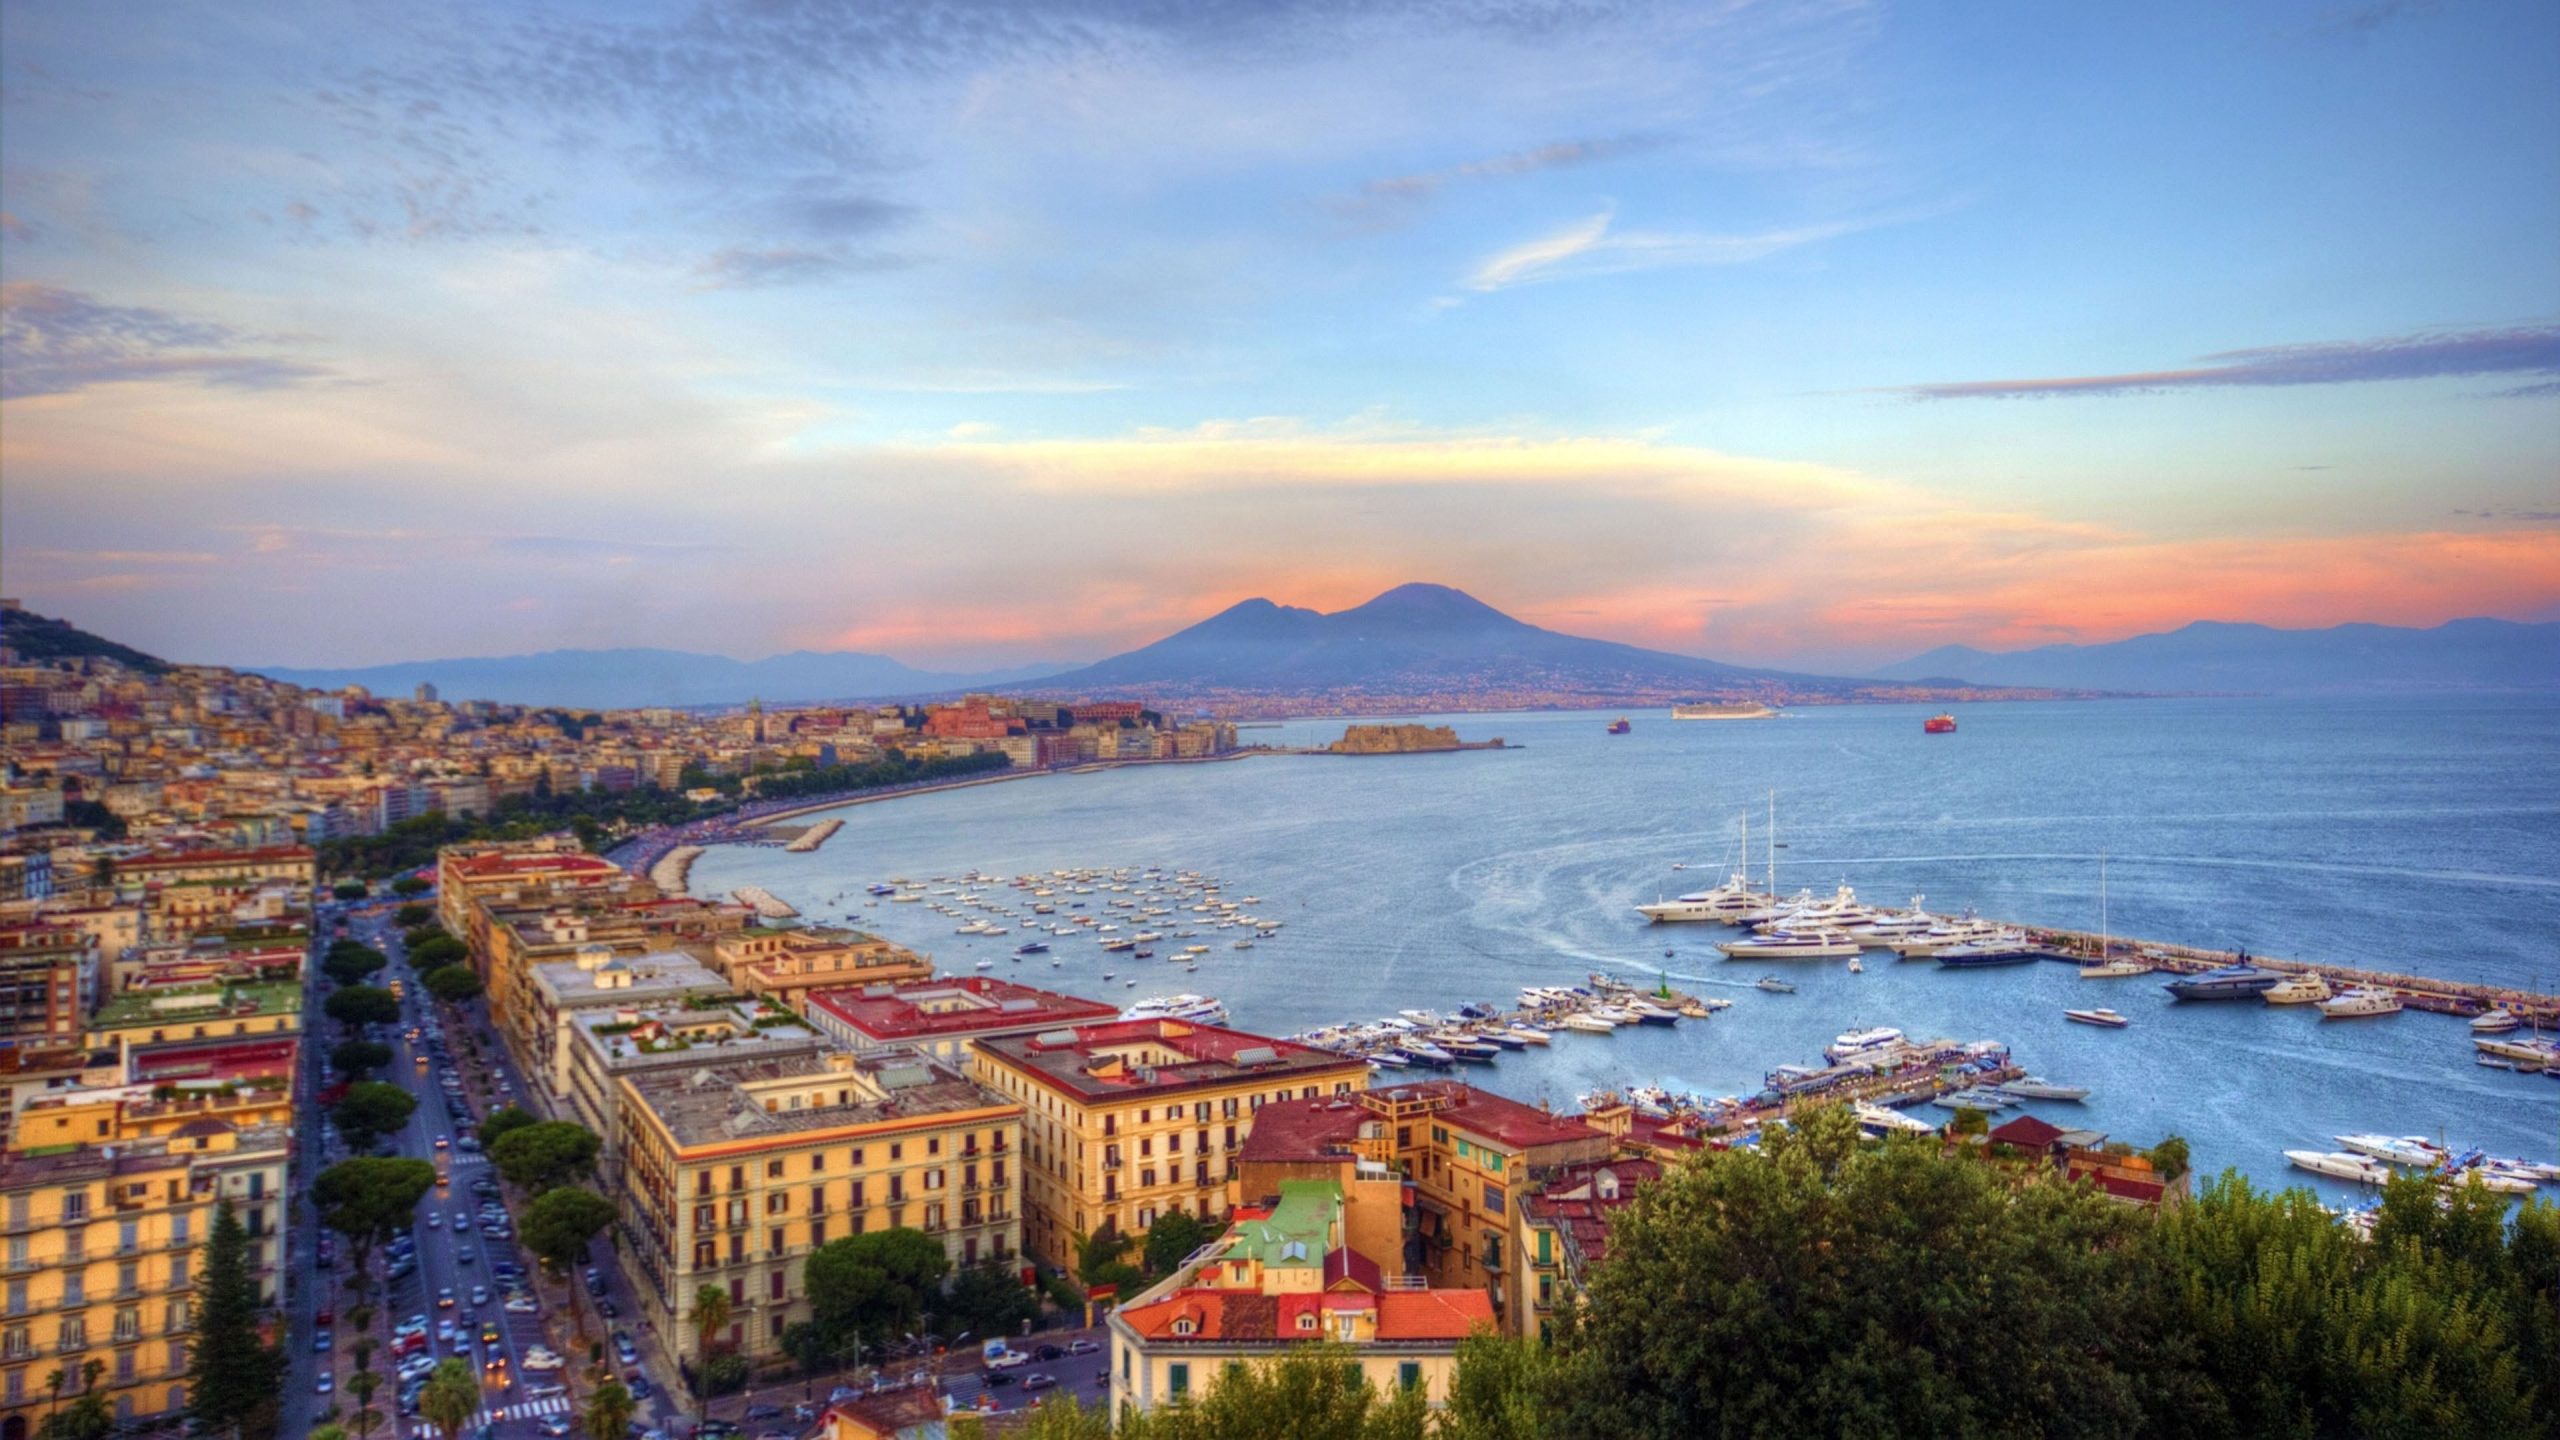 Wallpaper Naples Coastal City In Italy And Mount Vesuvius • Wallpaper For You